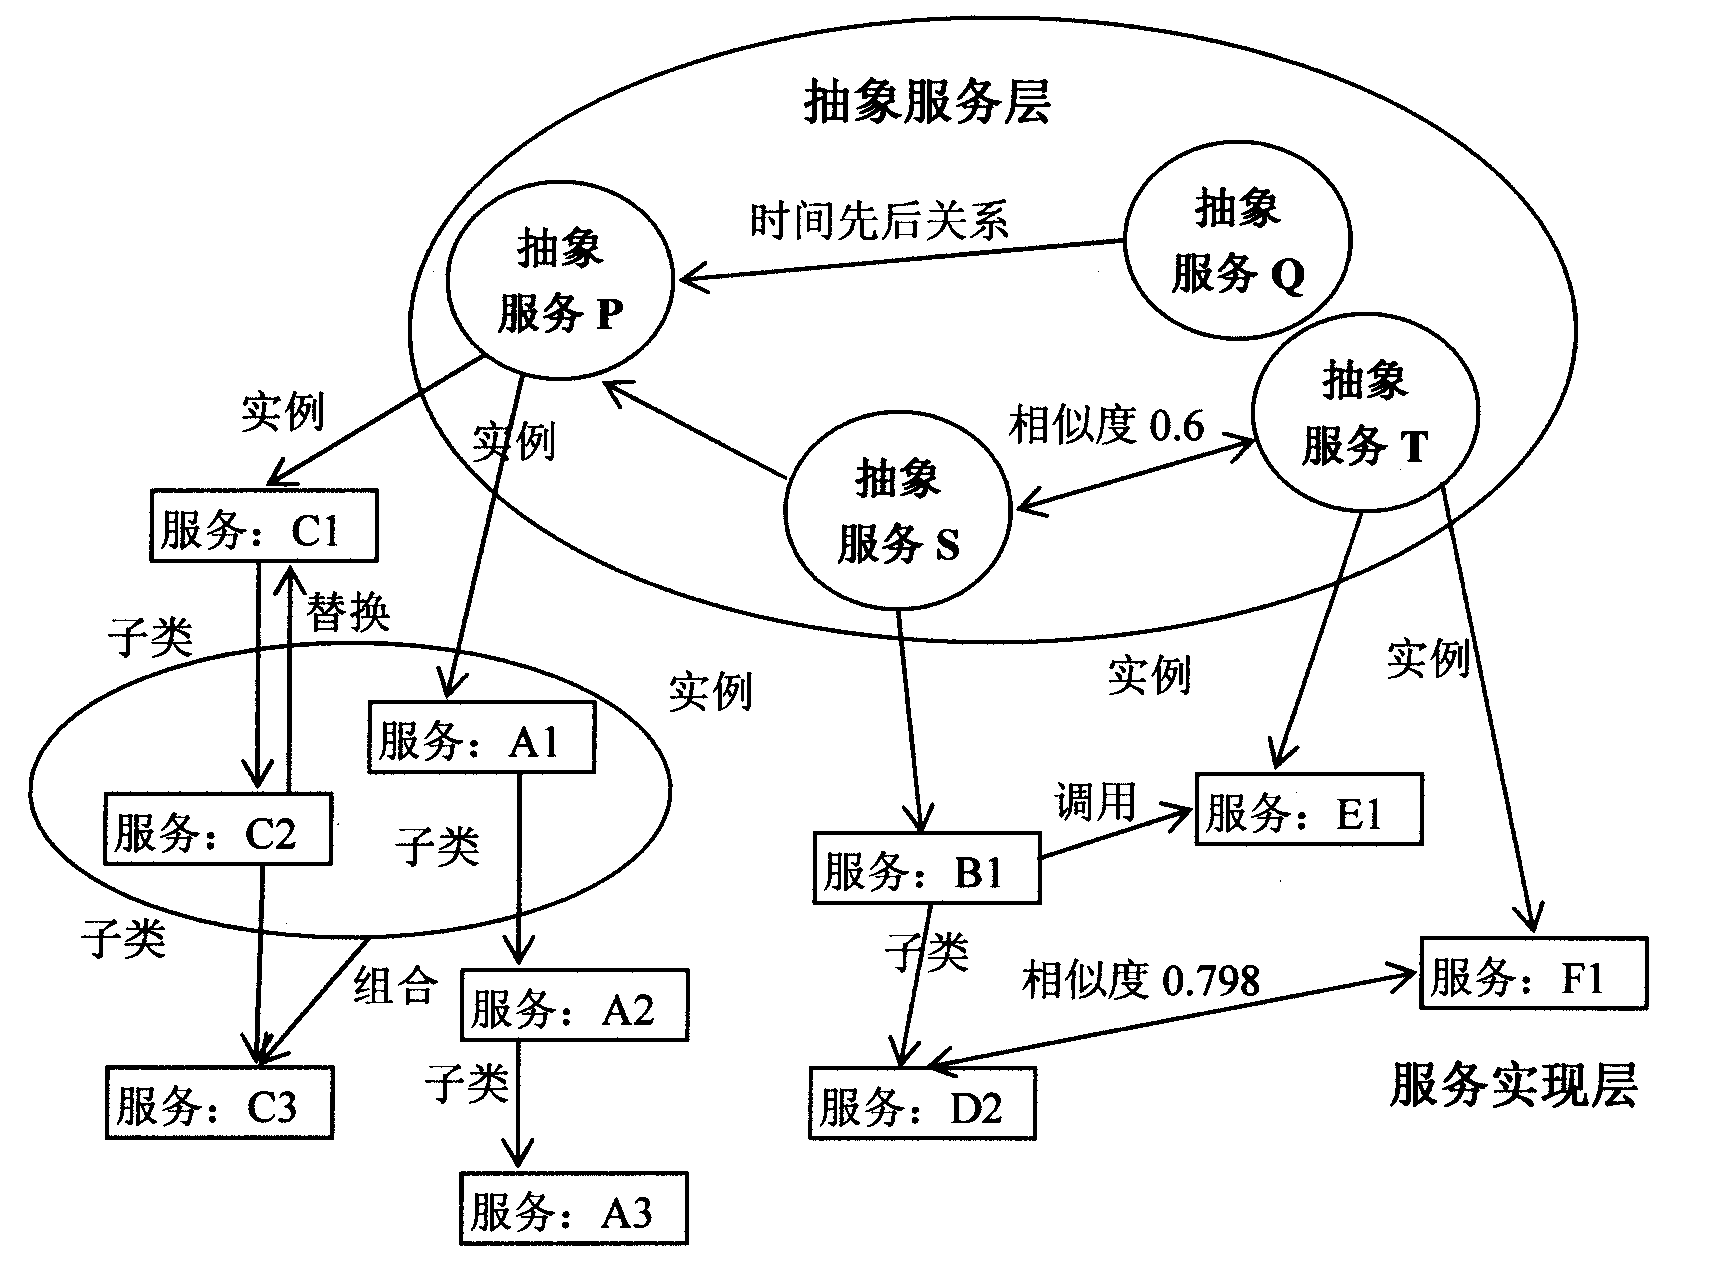 Web service relation network system based on semantic meanings